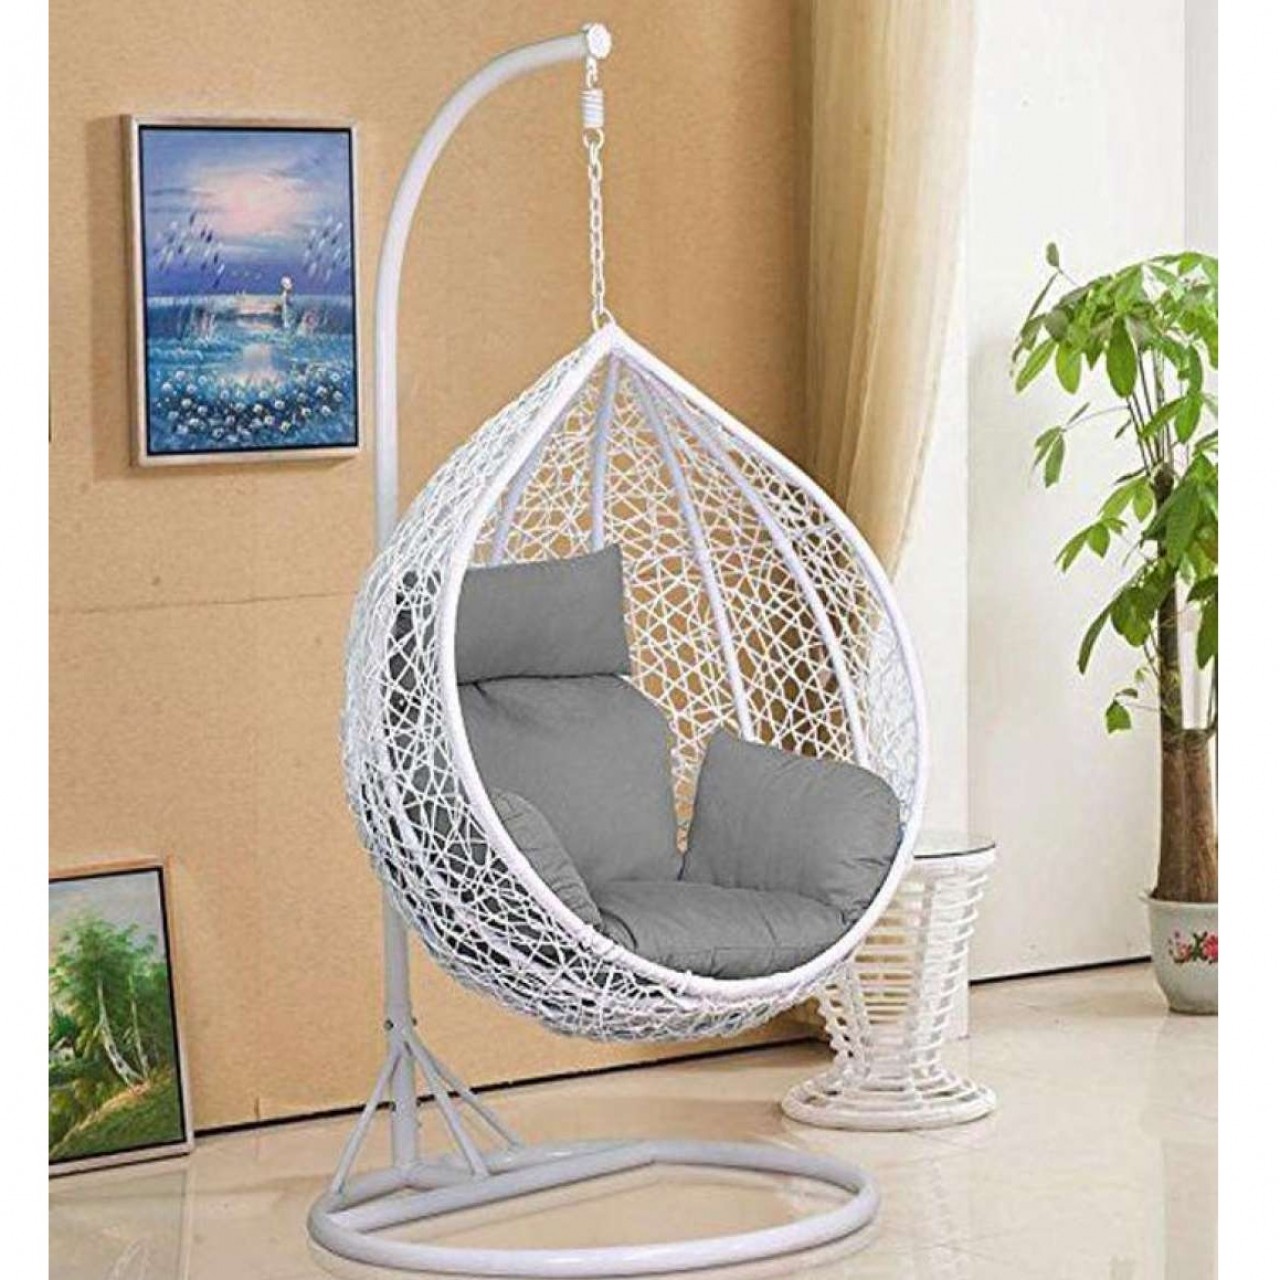 Egg Shape Hanging Swing Chair - Jhoola Stand - Cushion For Adult- White